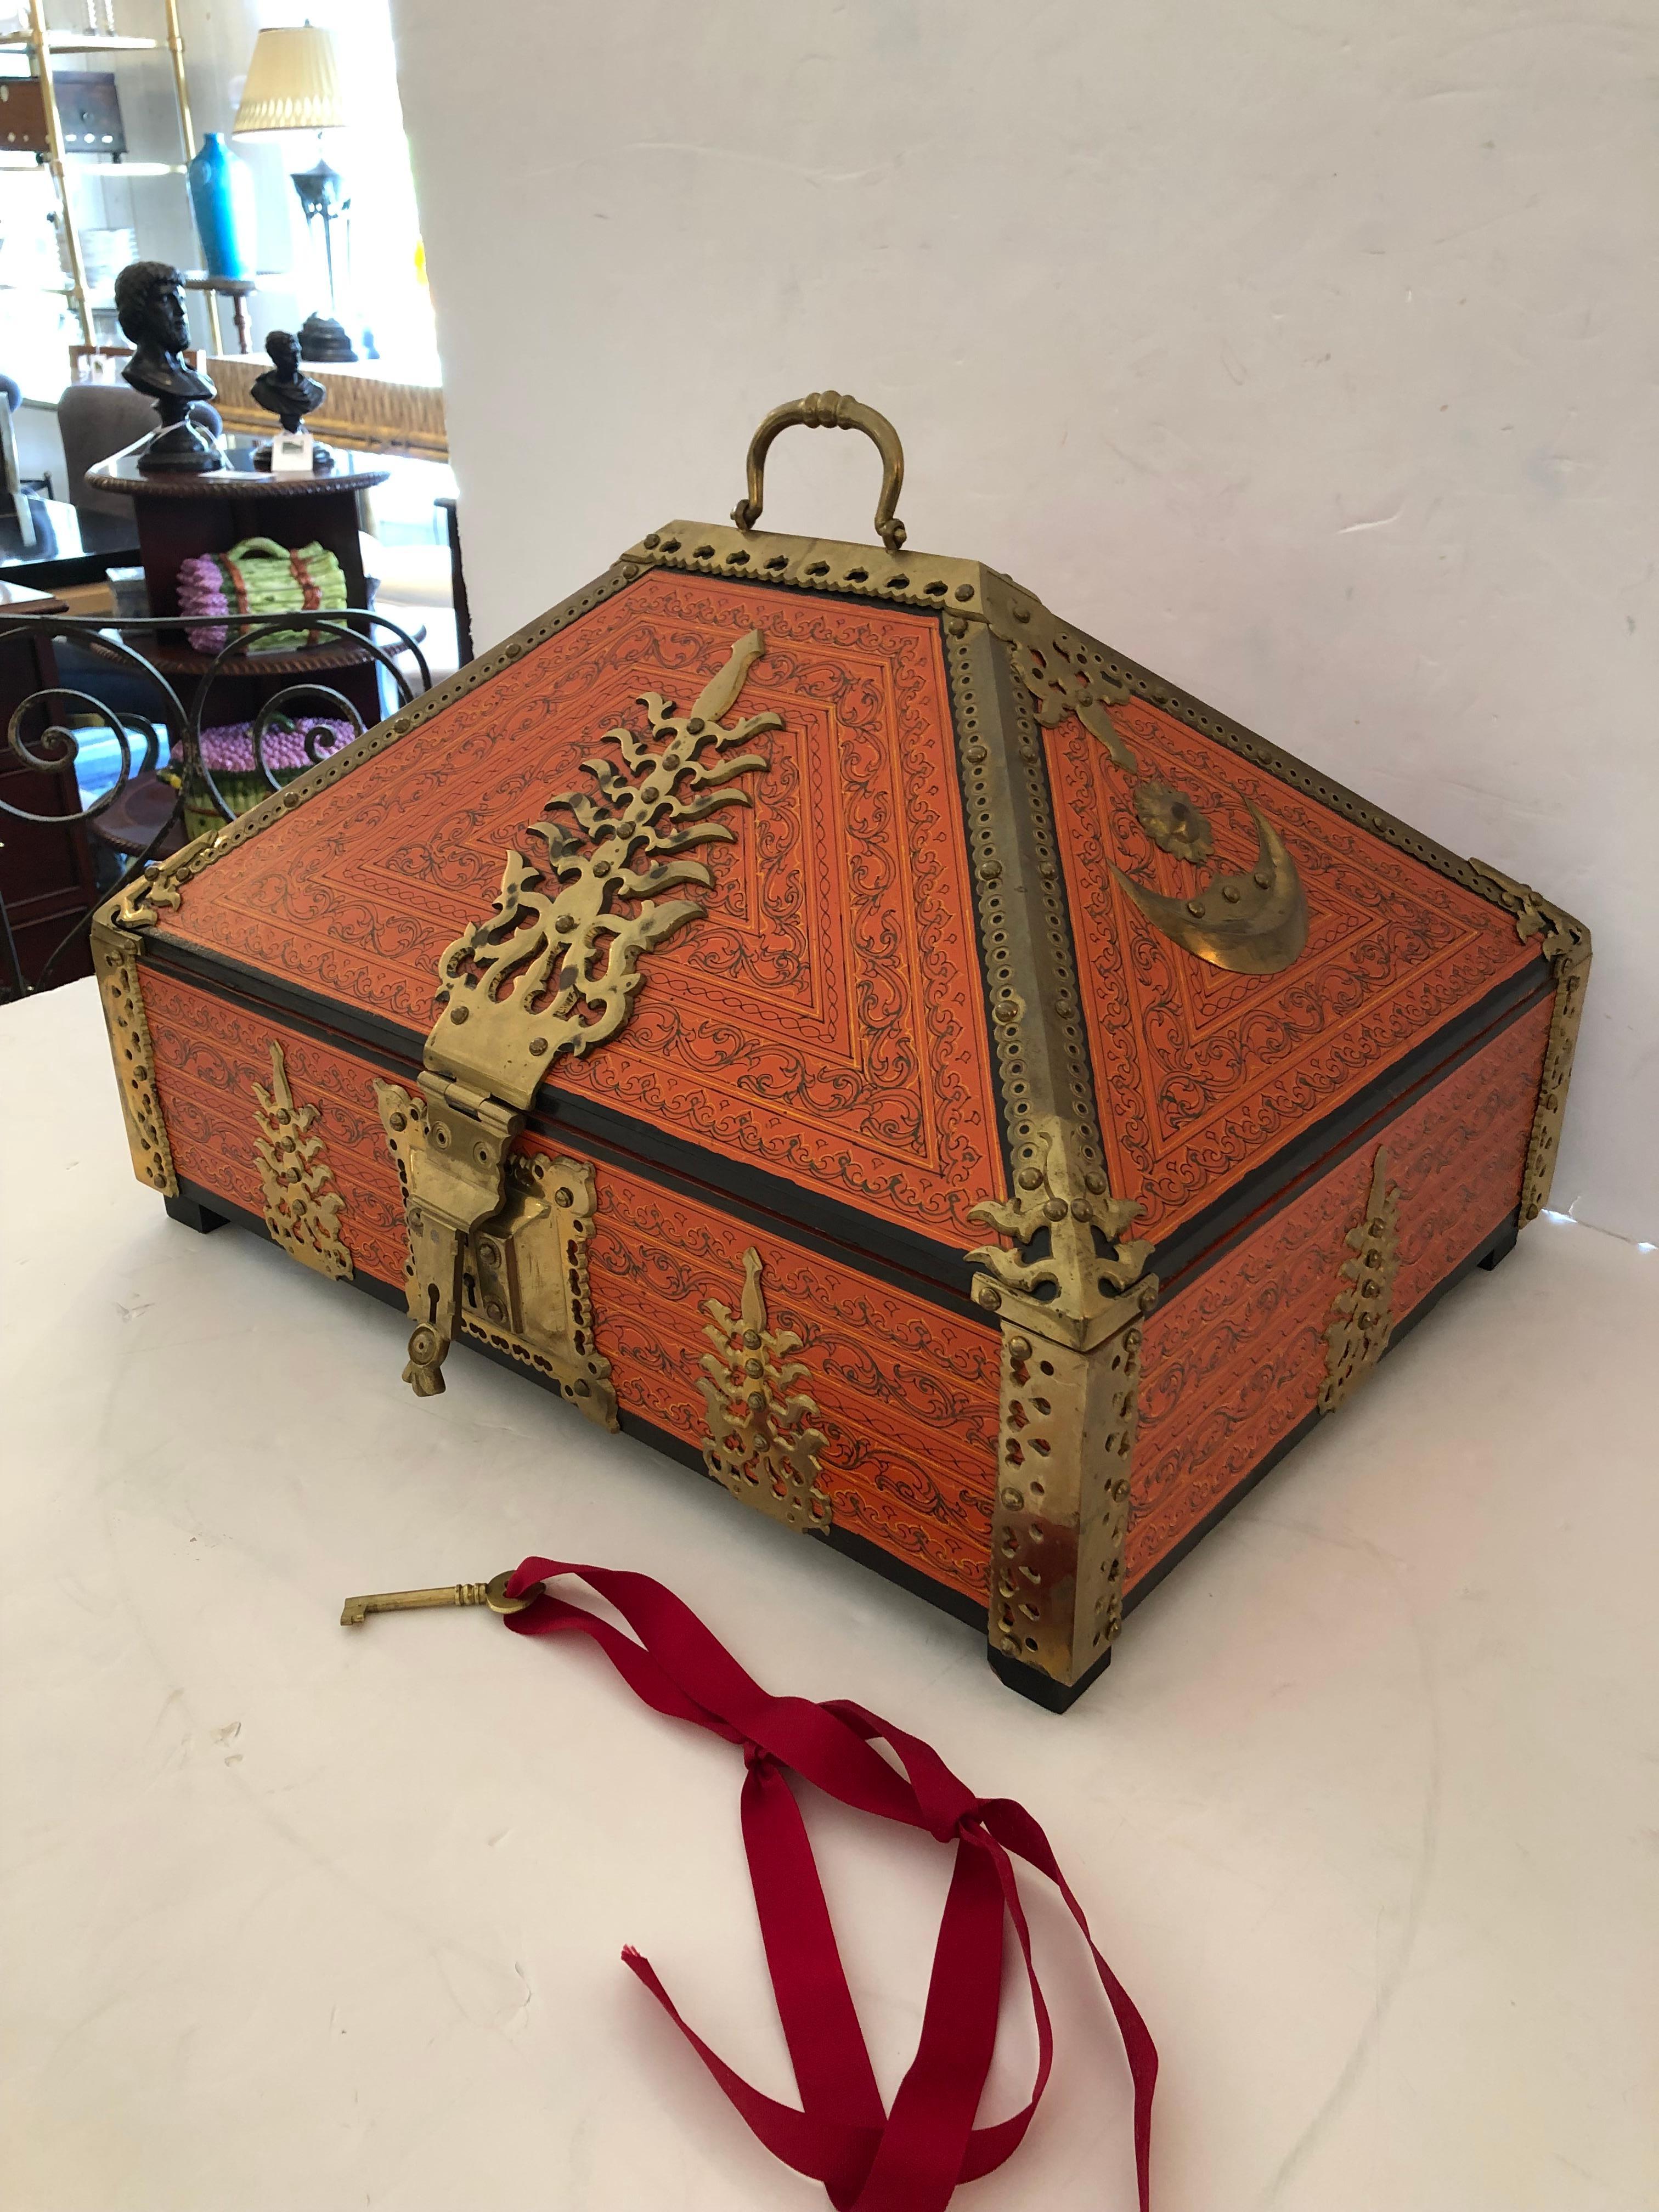 Incredible eye catching decorative box having meticulous decoration painted against a striking Hermes orange background. Stunning brass hinges, lock and key, sun and moon adorn the box. The more you look, the more details are revealed. Box opens to